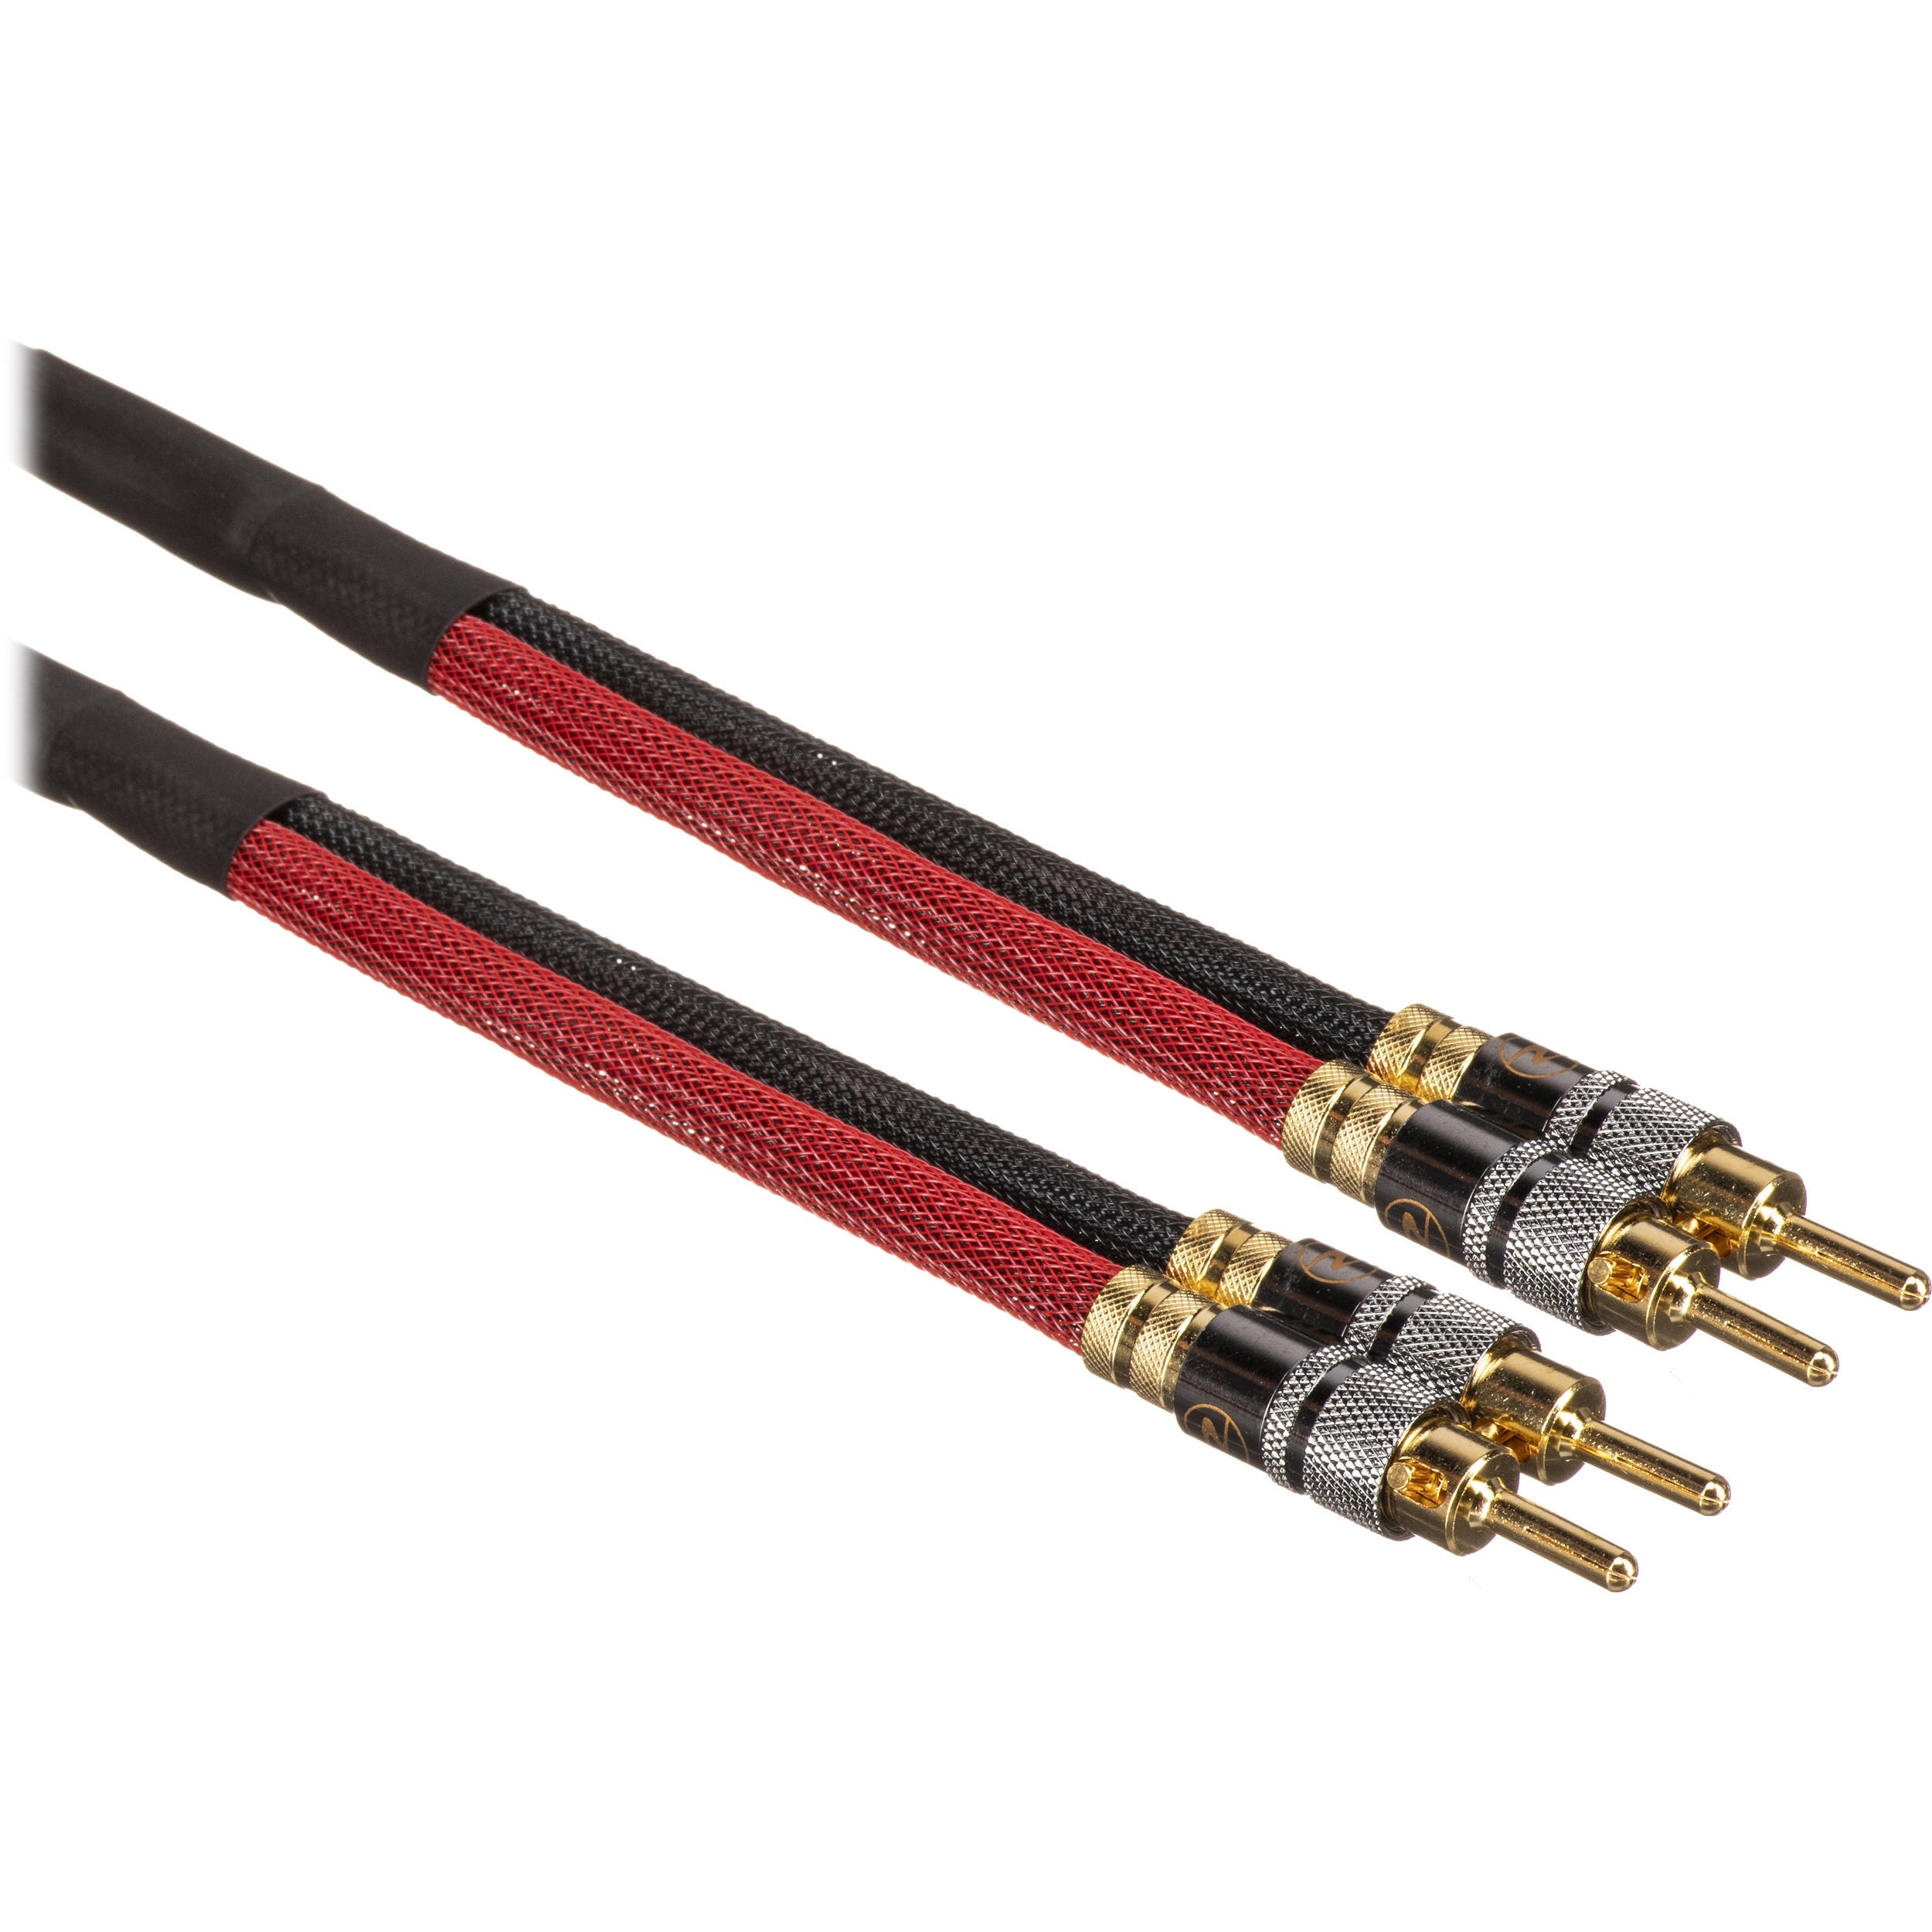 Canare 4S11 Star Quad Speaker Cable Dual Banana to Dual Banana (3')